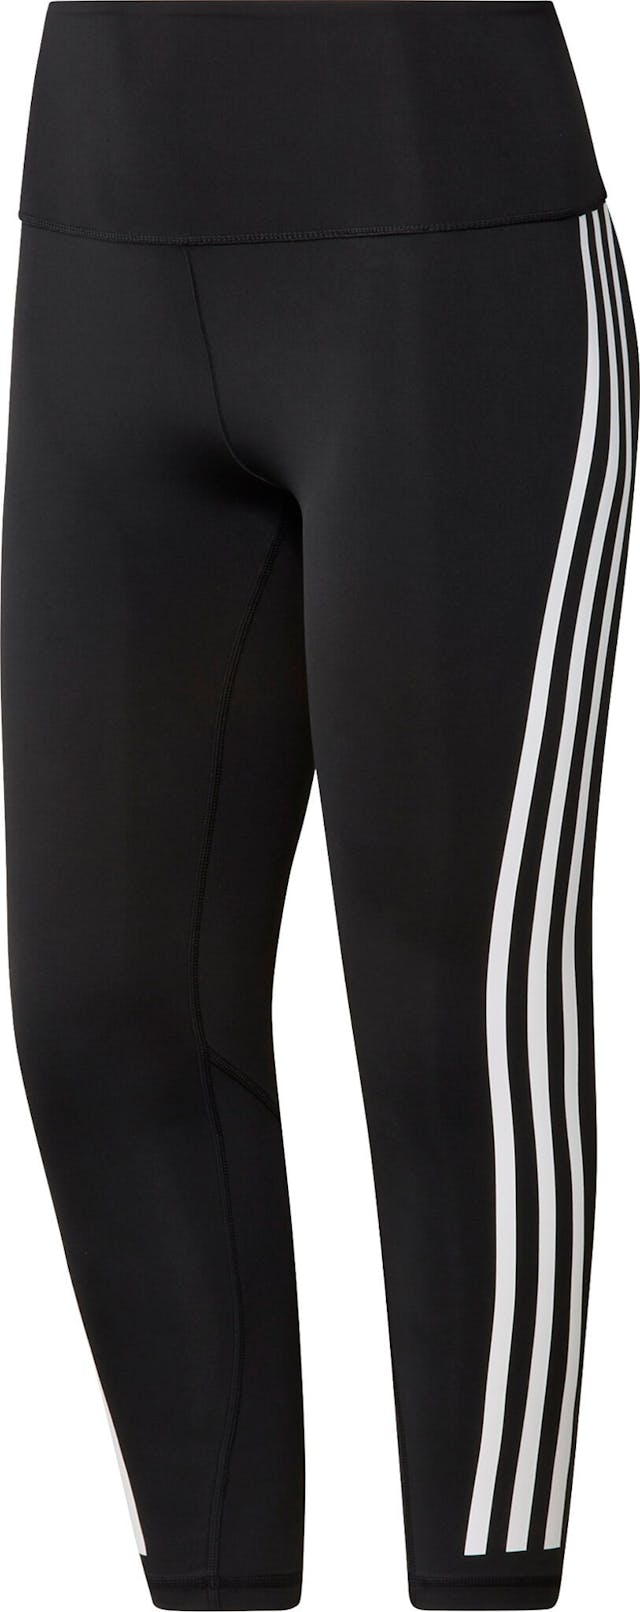 Product image for Optime Trainicons 3-Stripes 7/8 Tights (Plus Size) - Women's